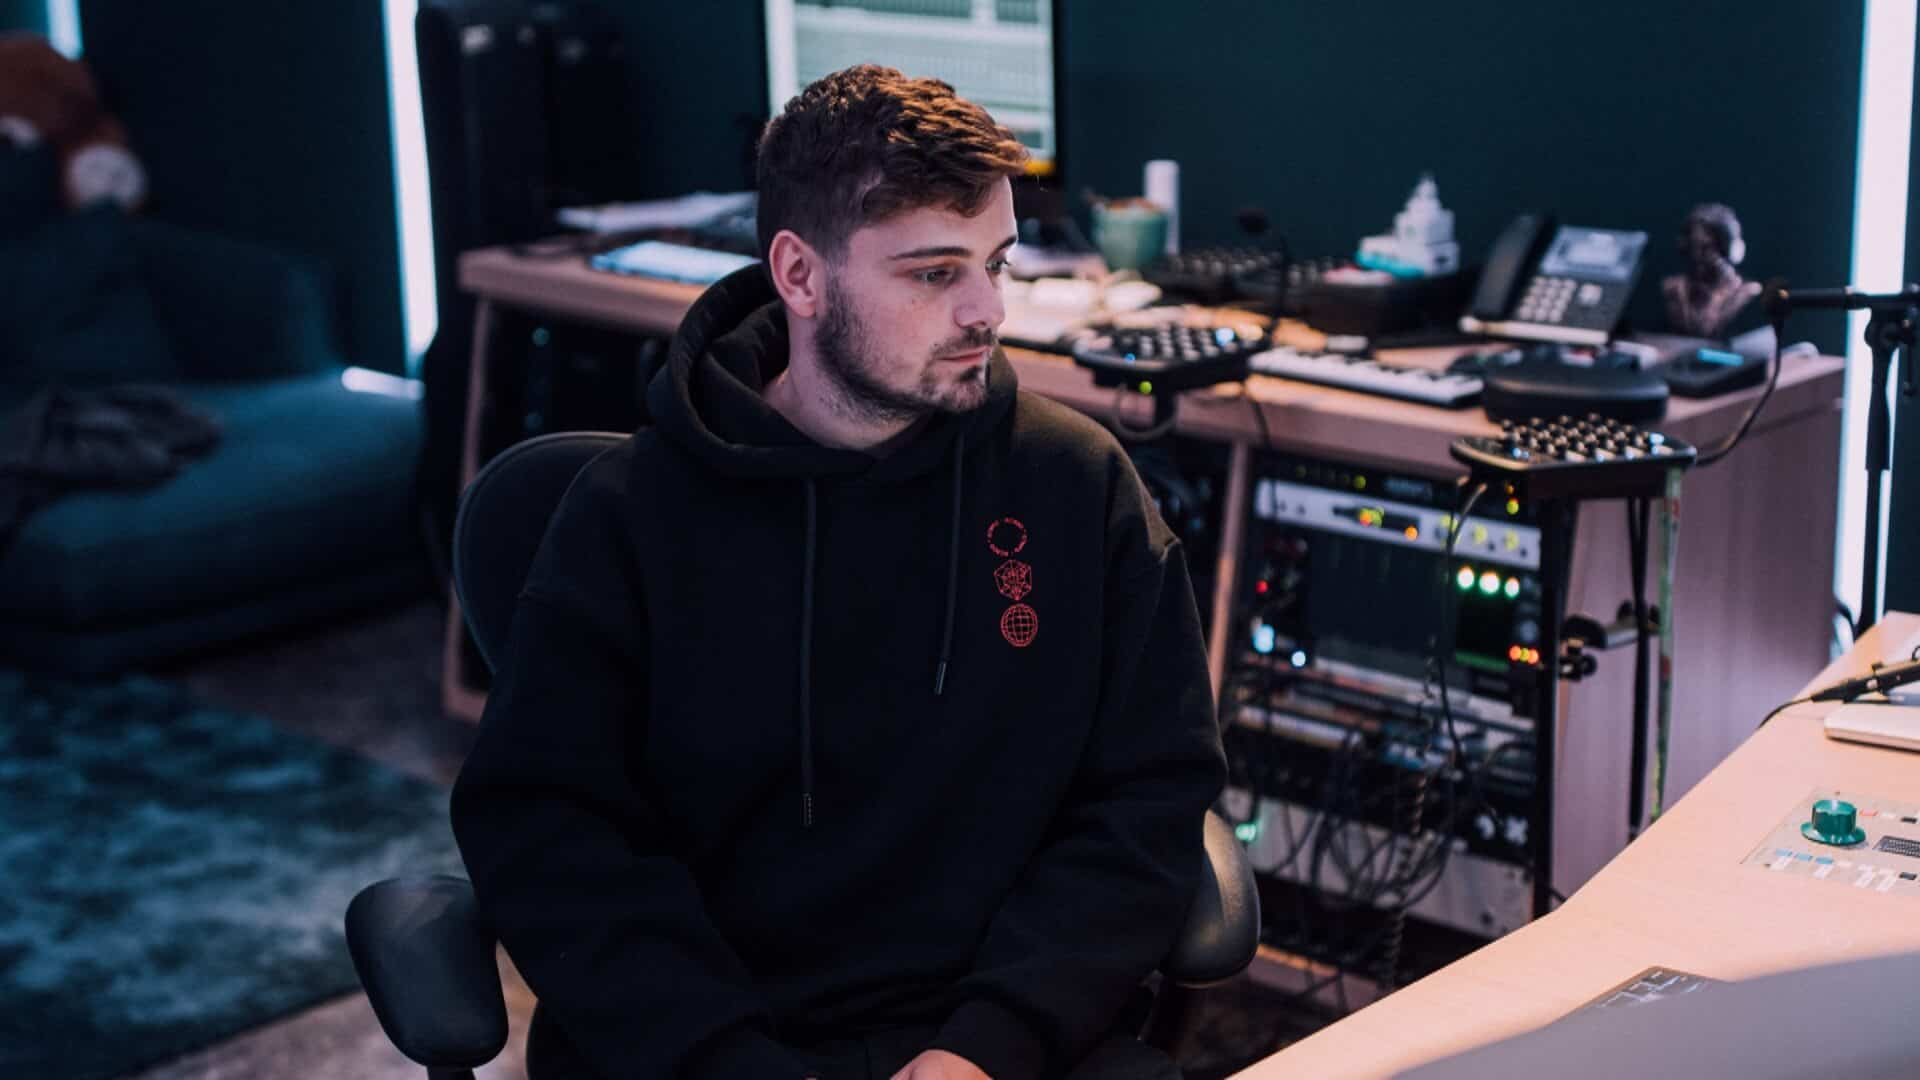 Martin Garrix unveils Music Academy in collaboration with JBL & STMPD RCRDS